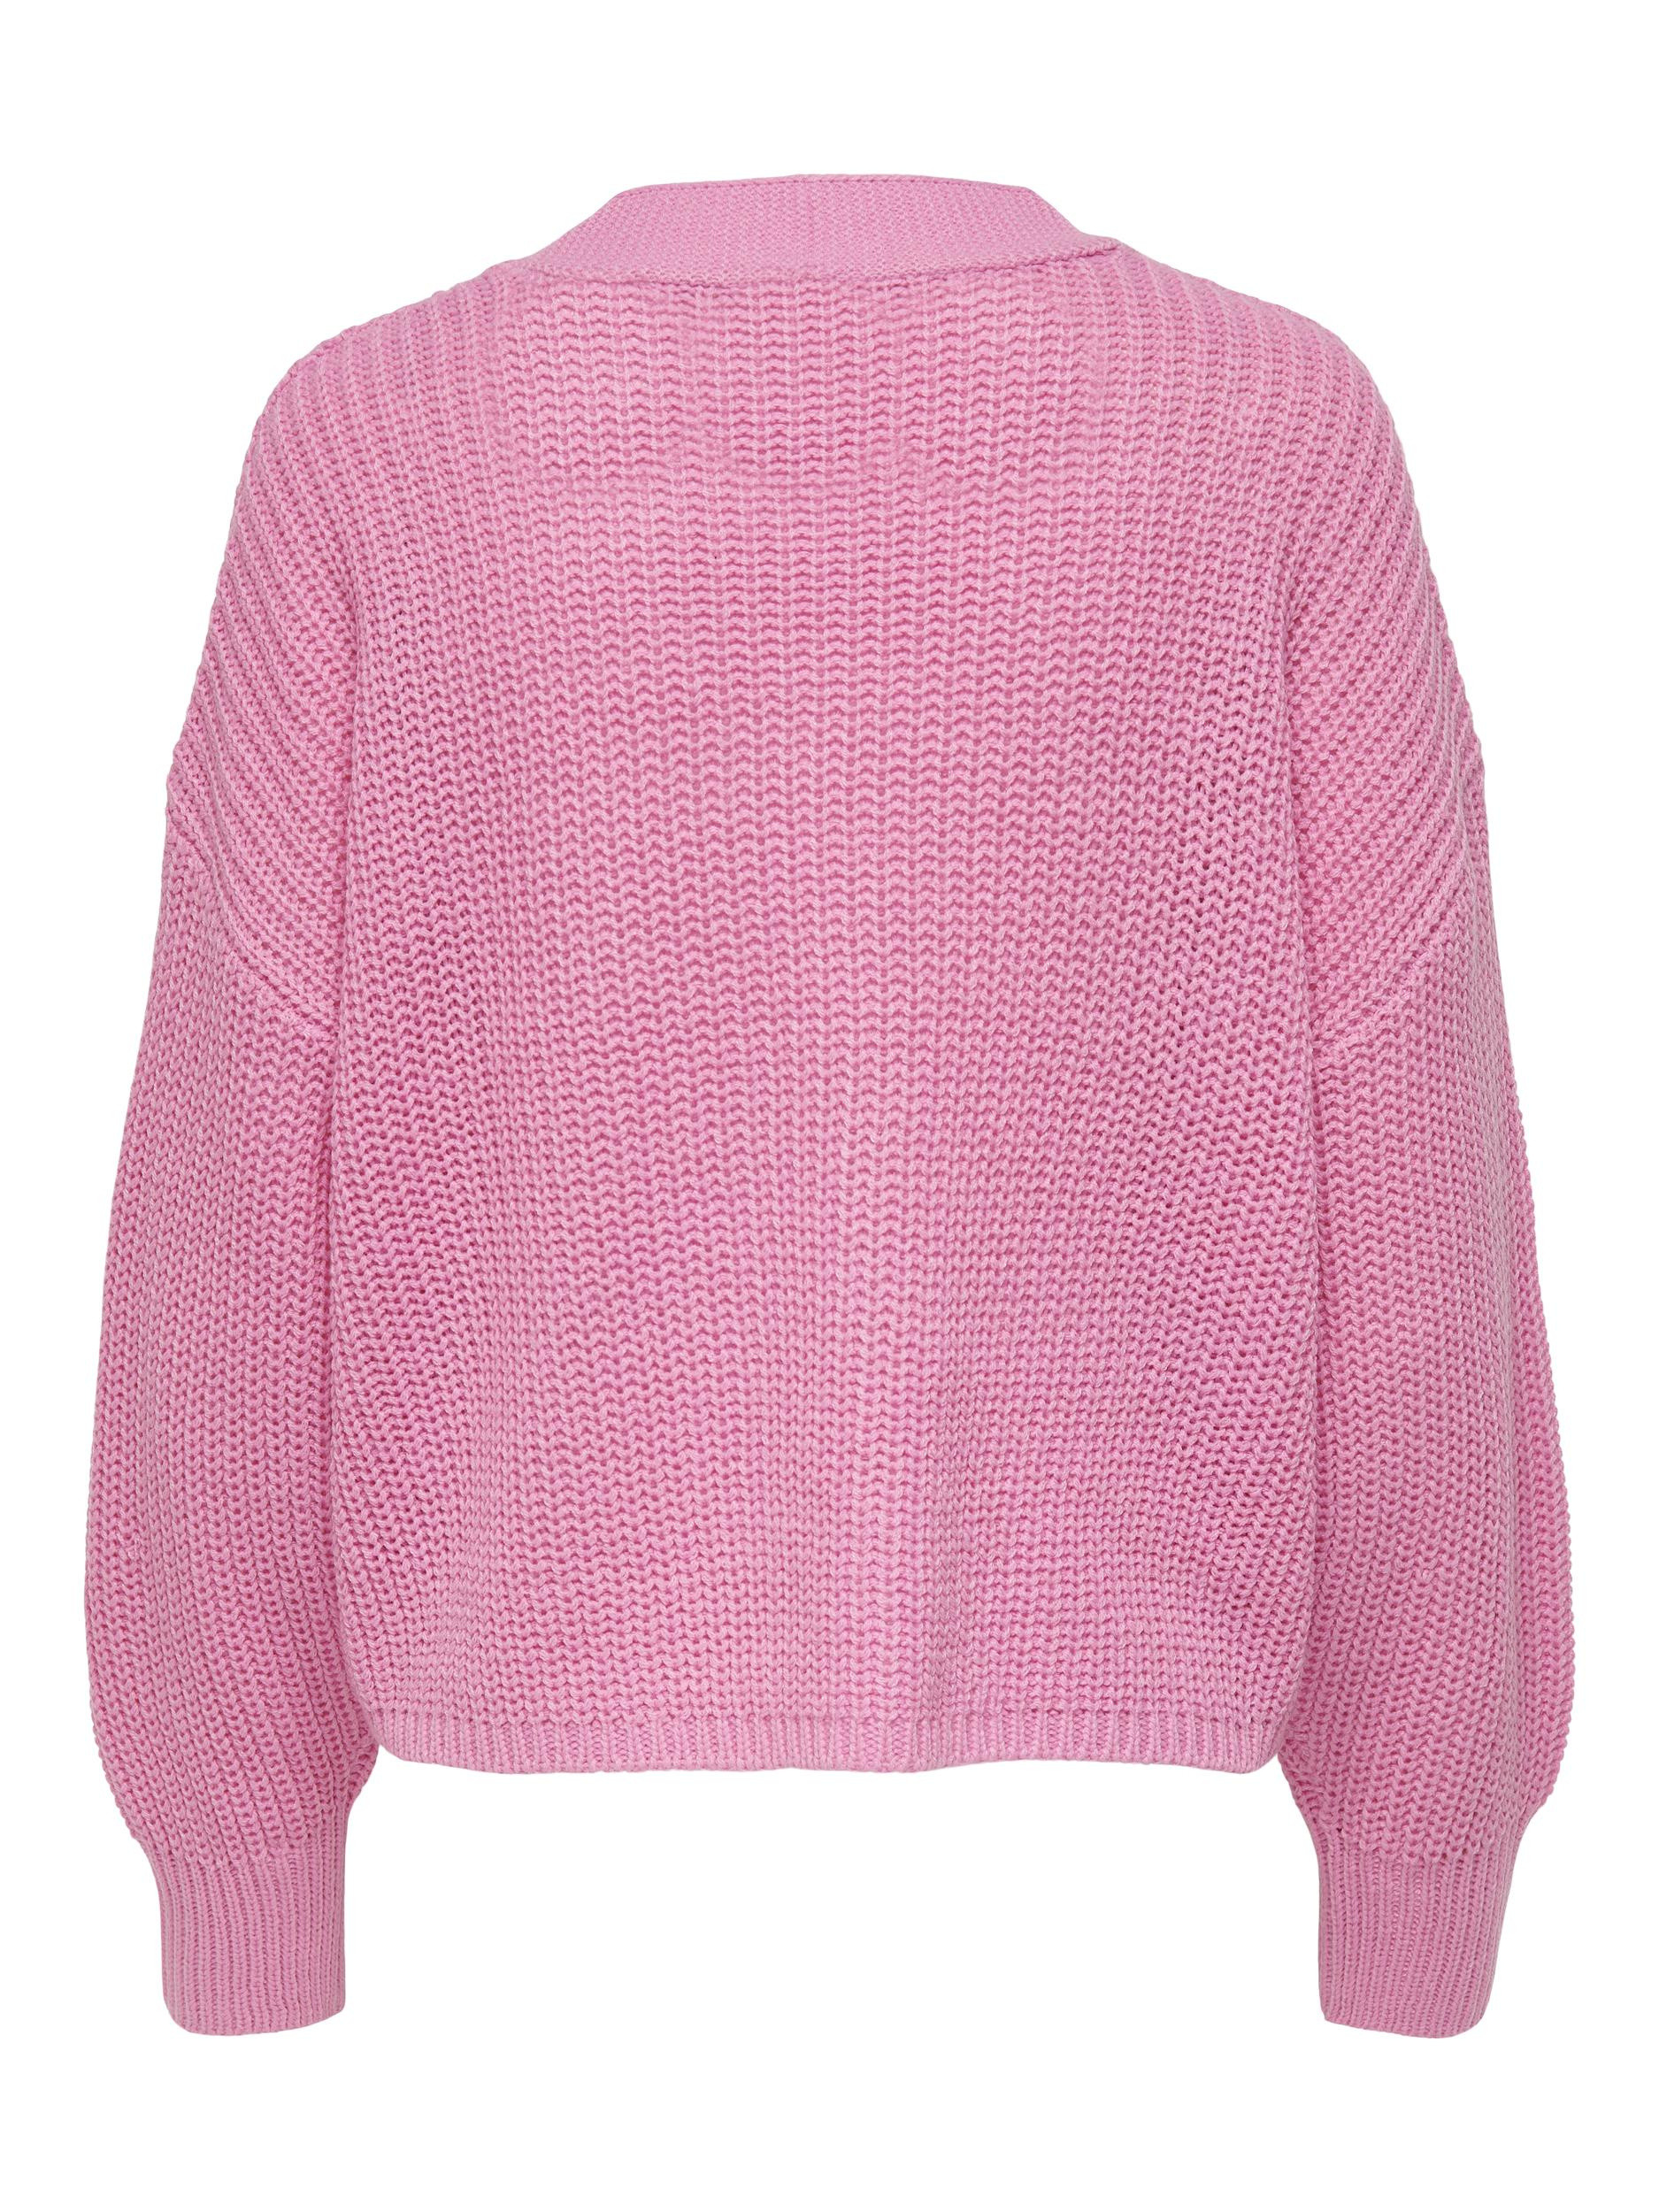 Only - Cardigan in maglia, Rosa fenicottero, large image number 1